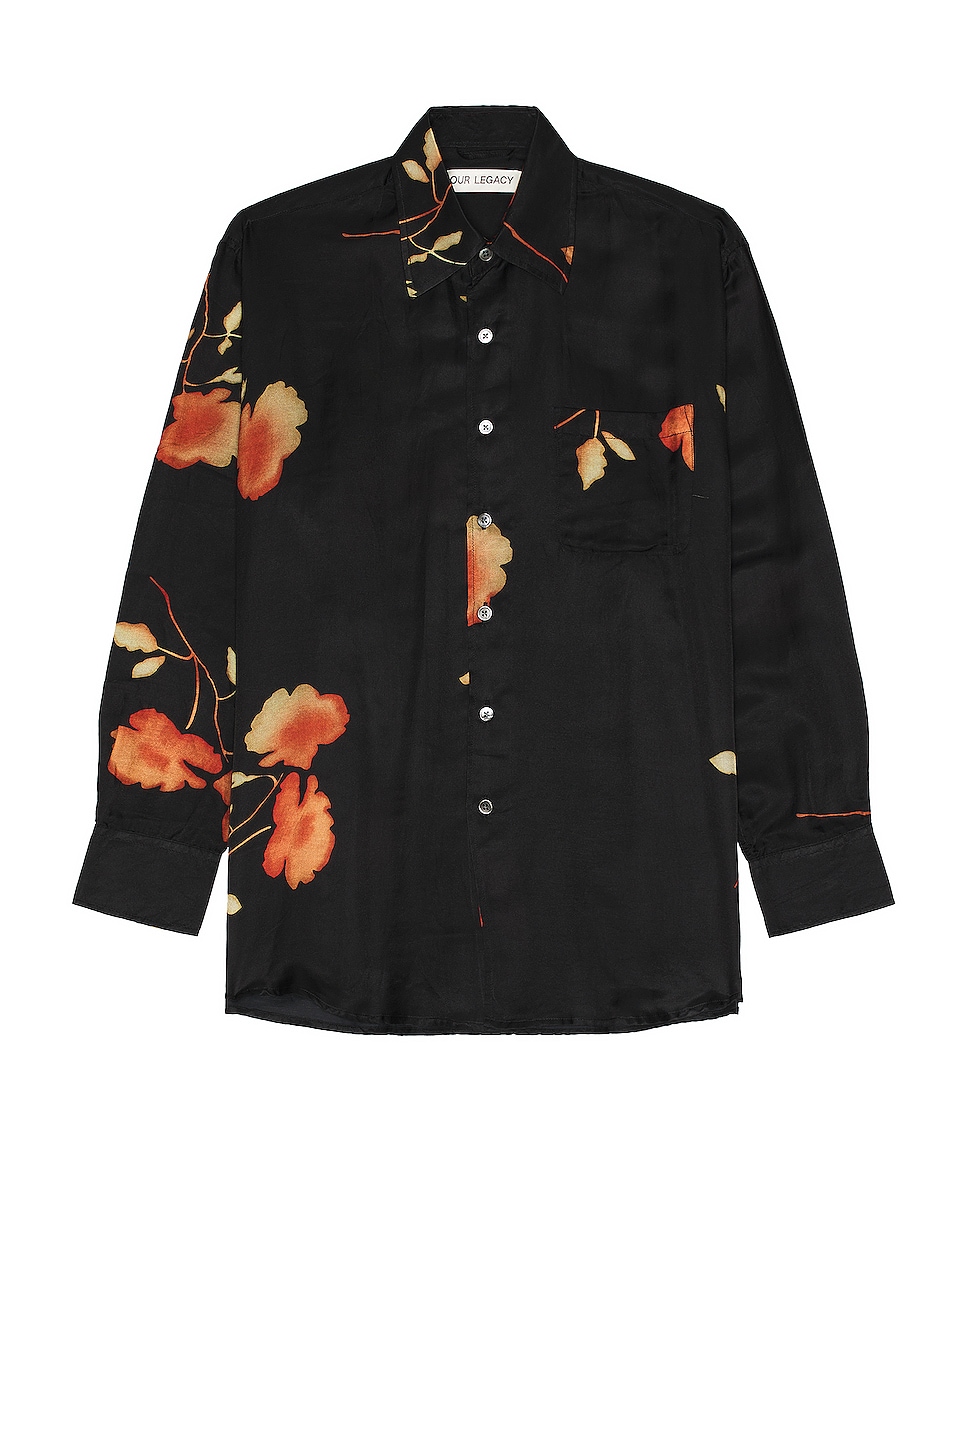 Image 1 of Our Legacy Above Shirt in Nocturnal Flower Print